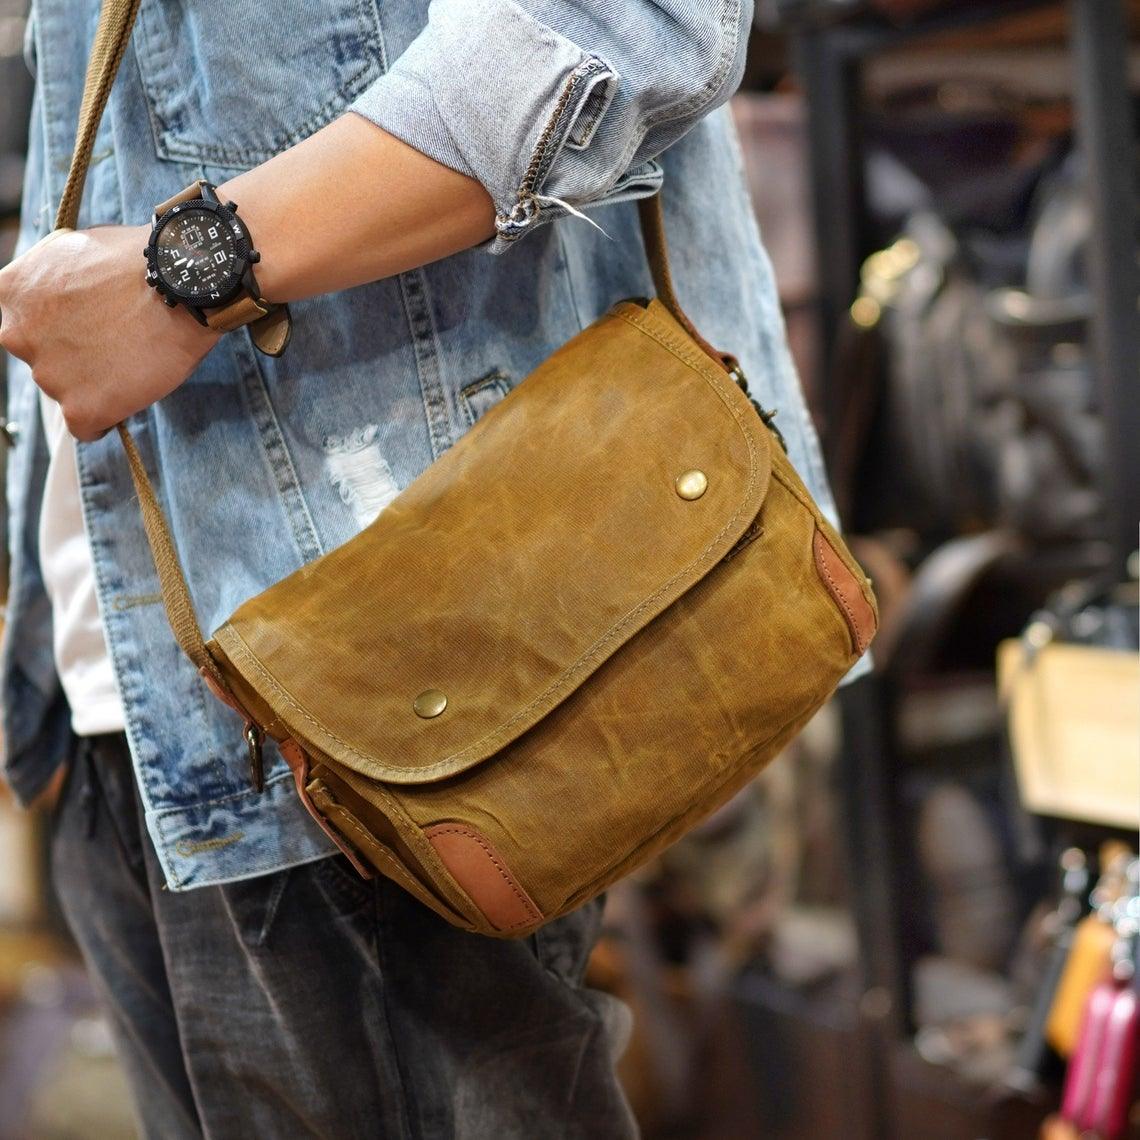 Satchel in waxed canvas / small messenger bag / Musette / handle bar bag